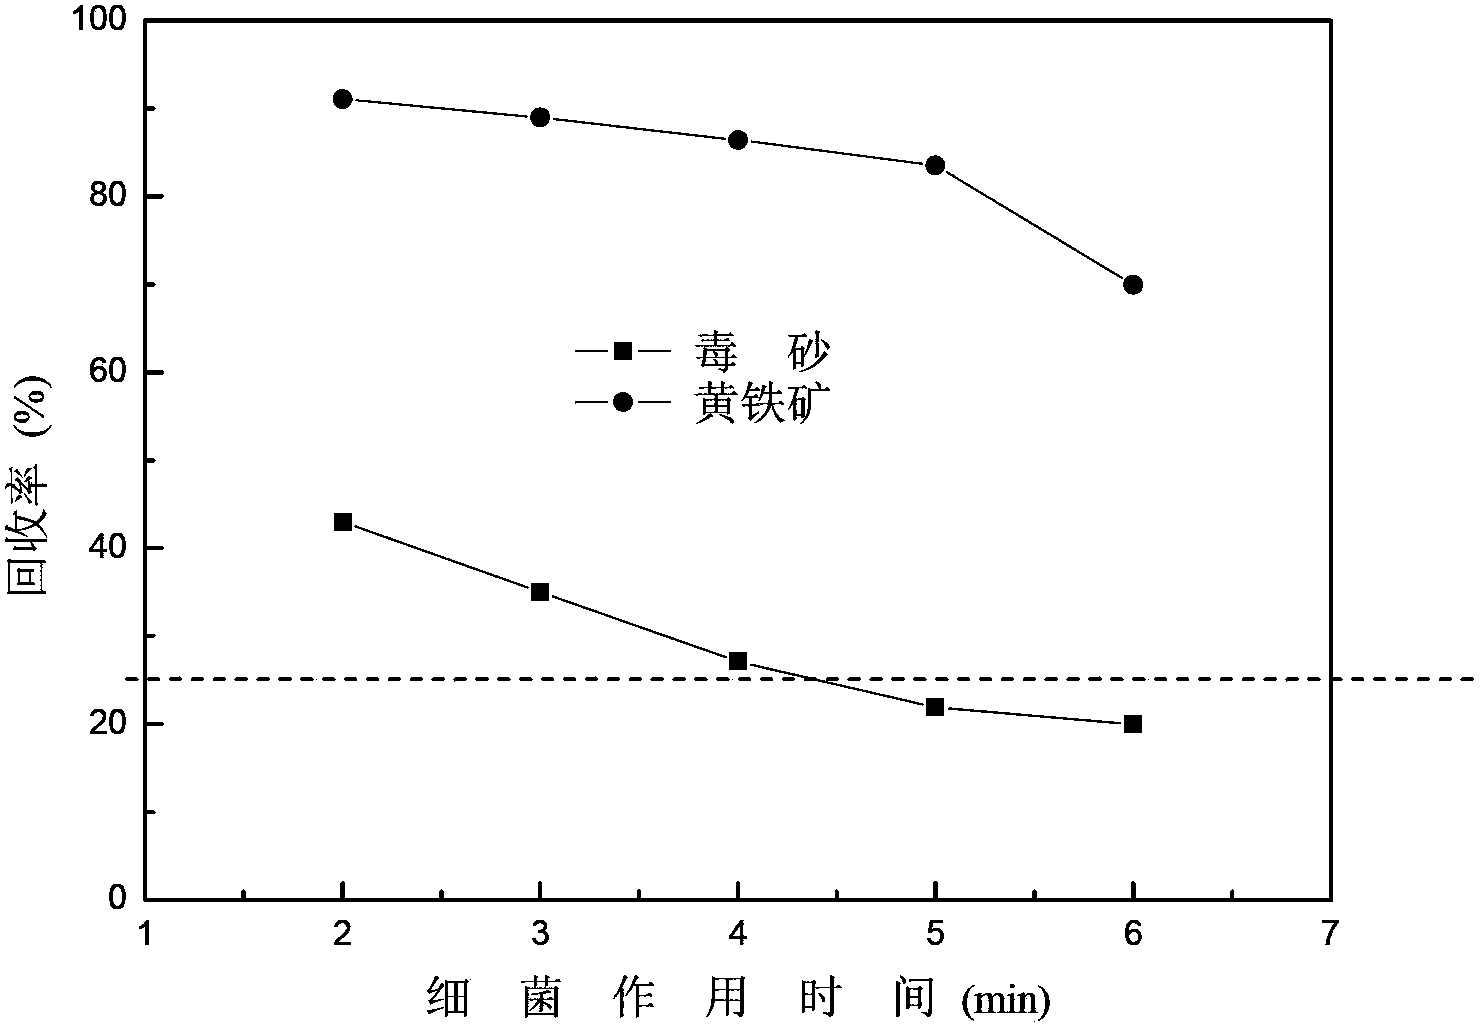 Method for using microbial flotation method to separate pyrites from arsenopyrites